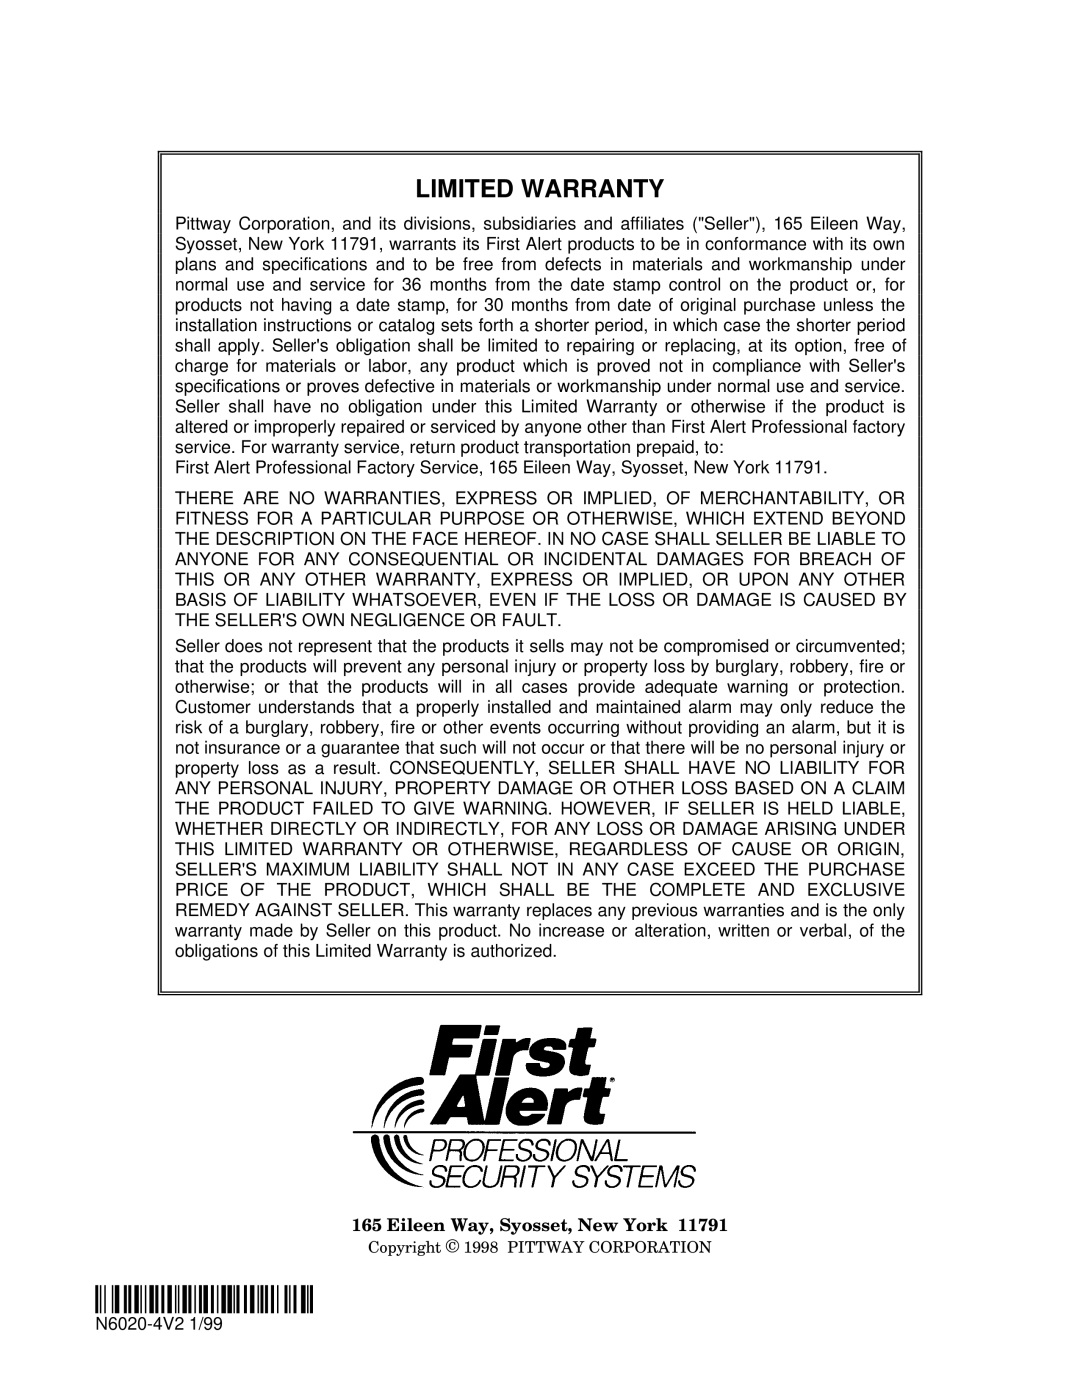 First Alert fire and burglary partitioned security systems with scheduleing manual ¬19¢Ll, Limited Warranty 